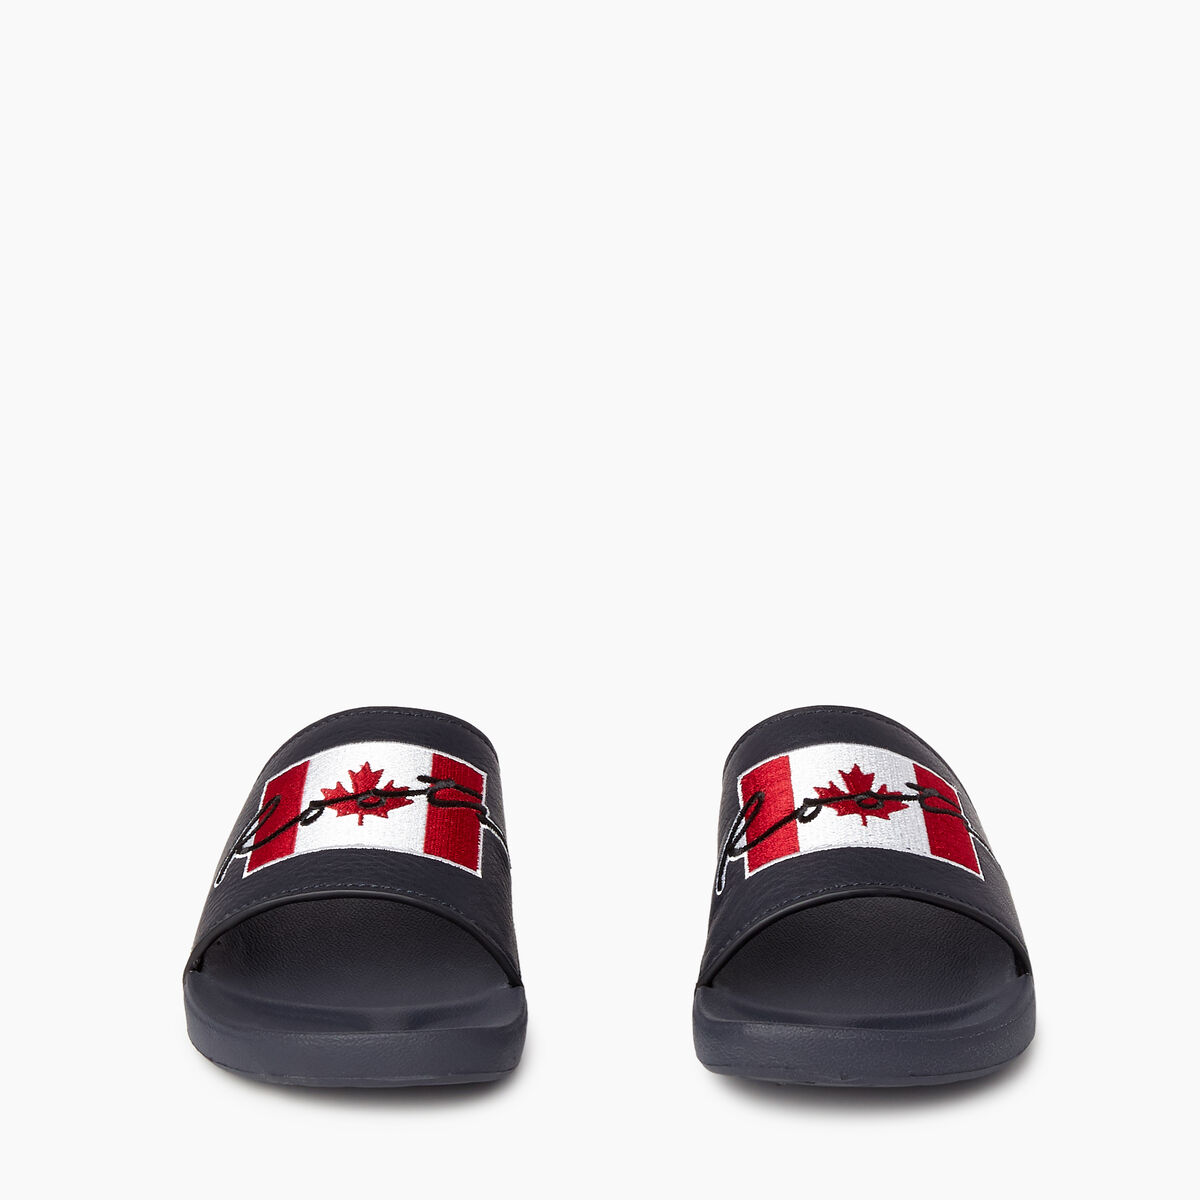 Womens Long Point Canada Slide